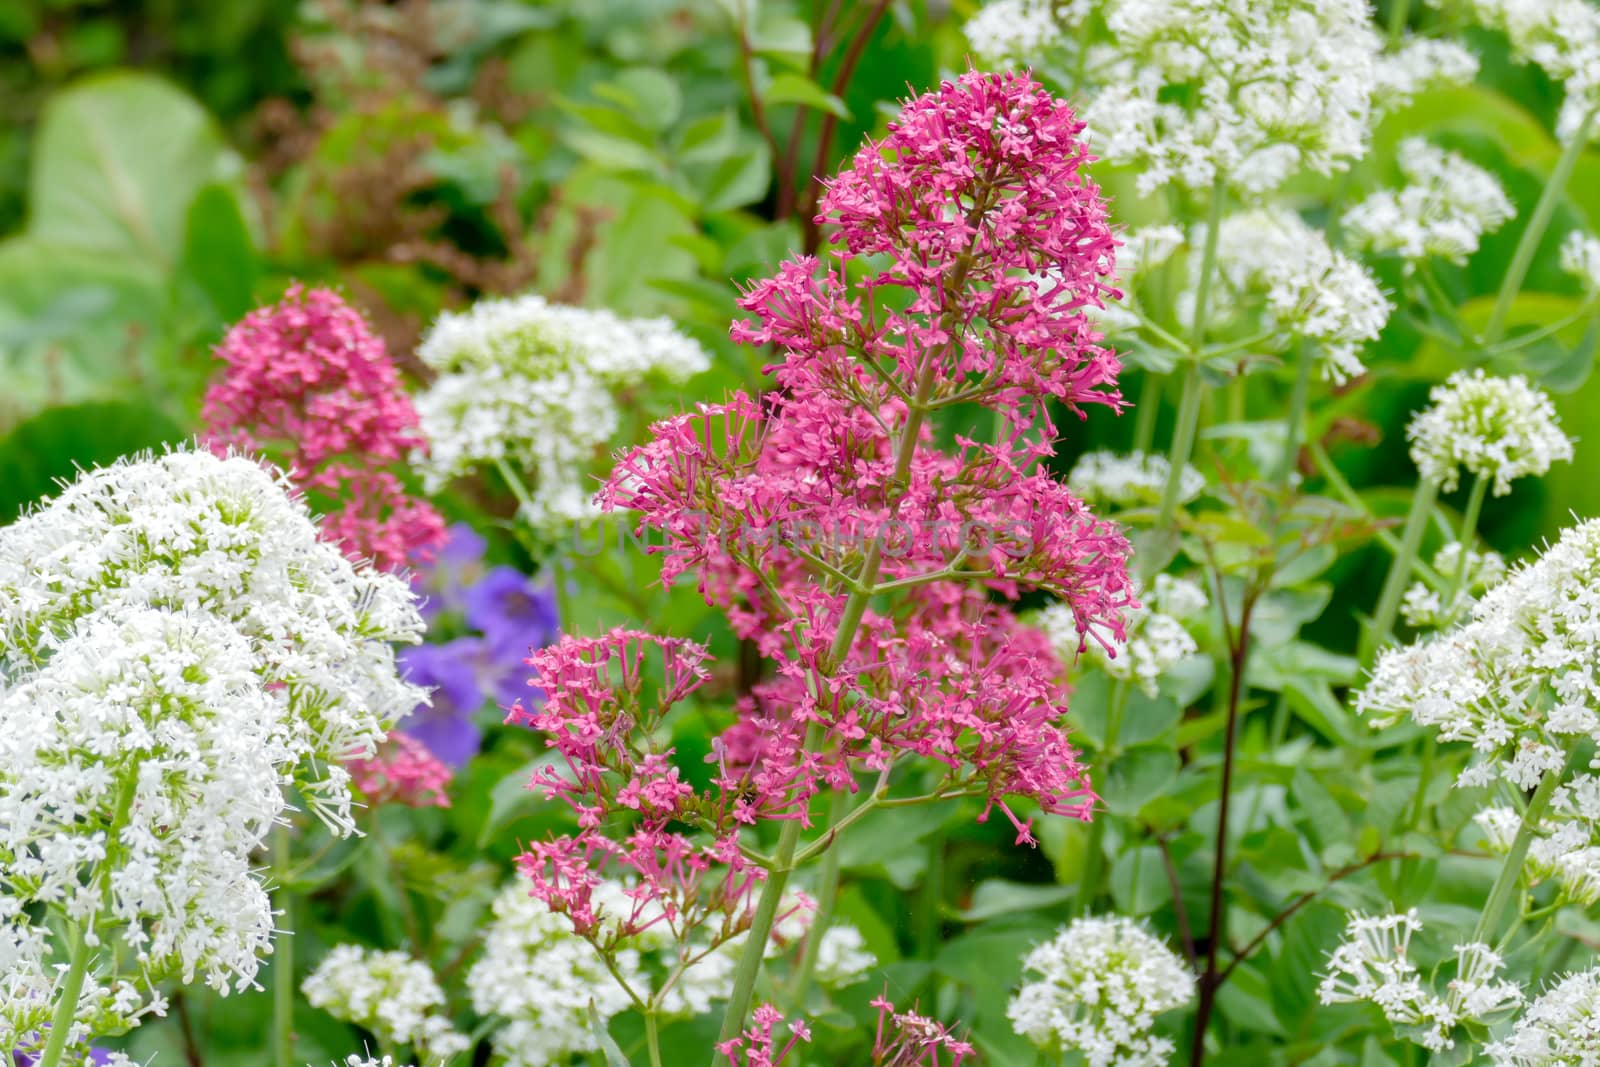 Red and White Valerian (Centranthus ruber)